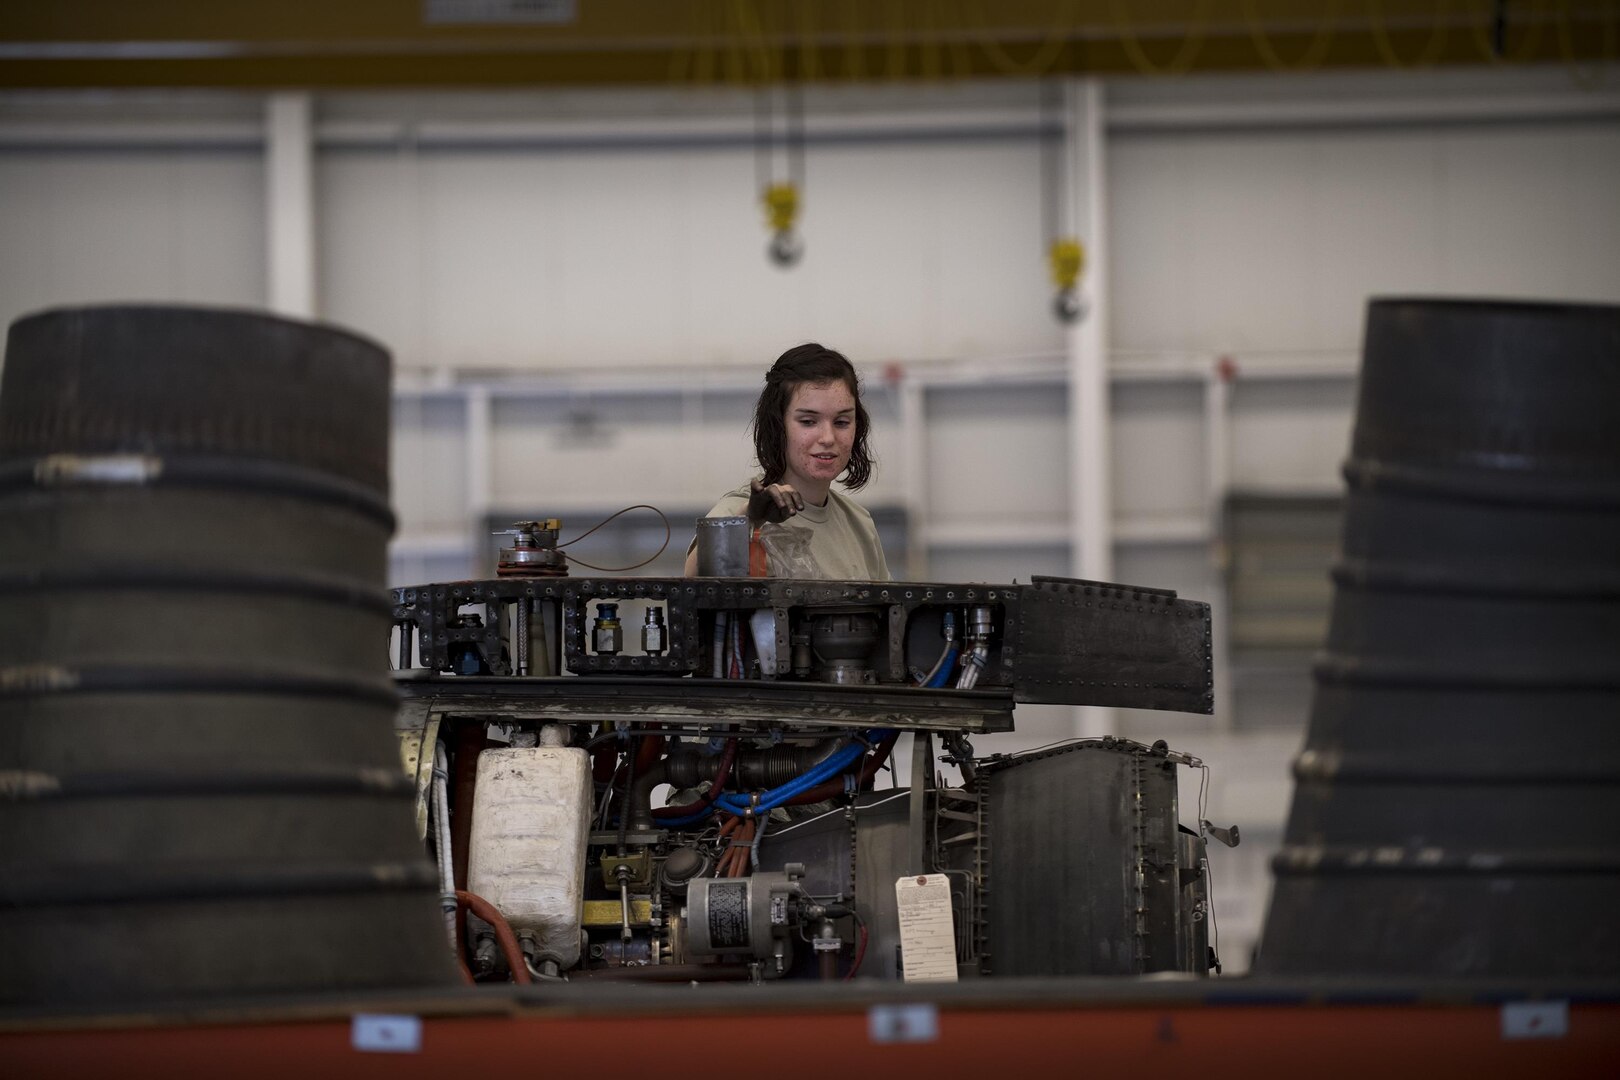 Airman 1st Class Teresa Springer, 23d Component Maintenance Squadron propulsion technician, drops nuts and bolts into a plastic baggie while dissembling a TF-34 engine used in A-10C Thunderbolt lls, Jan. 25, 2017, at Moody Air Force Base, Ga. Airmen from the propulsion flight are responsible for breaking down, refurbishing and repairing TF-34 engines to replace ones currently in use in A-10s. (U.S. Air Force photo by Airman 1st Class Daniel Snider)